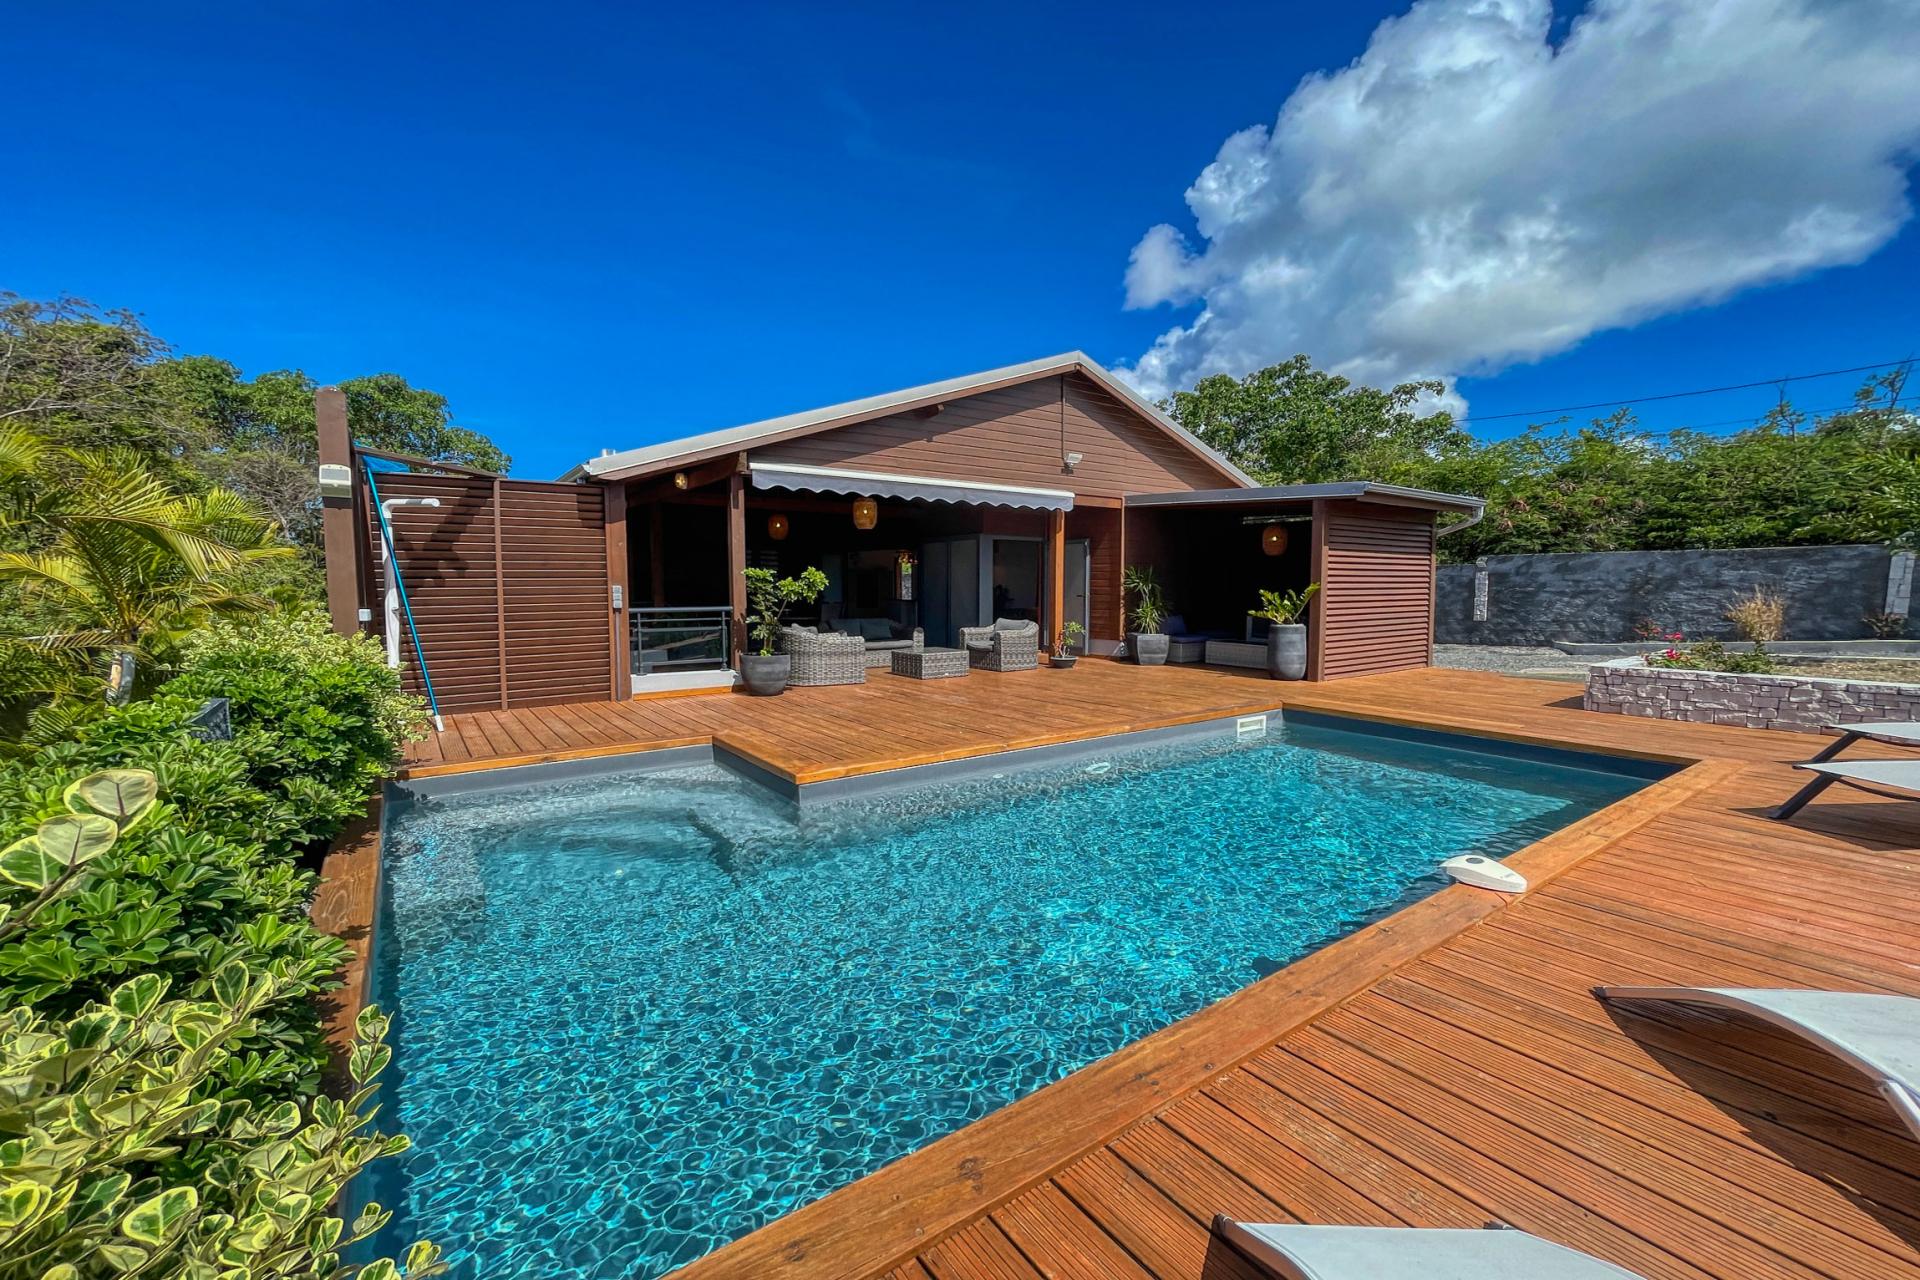 Rental villa Guadeloupe 6 persons 3 bedrooms with pool and spa